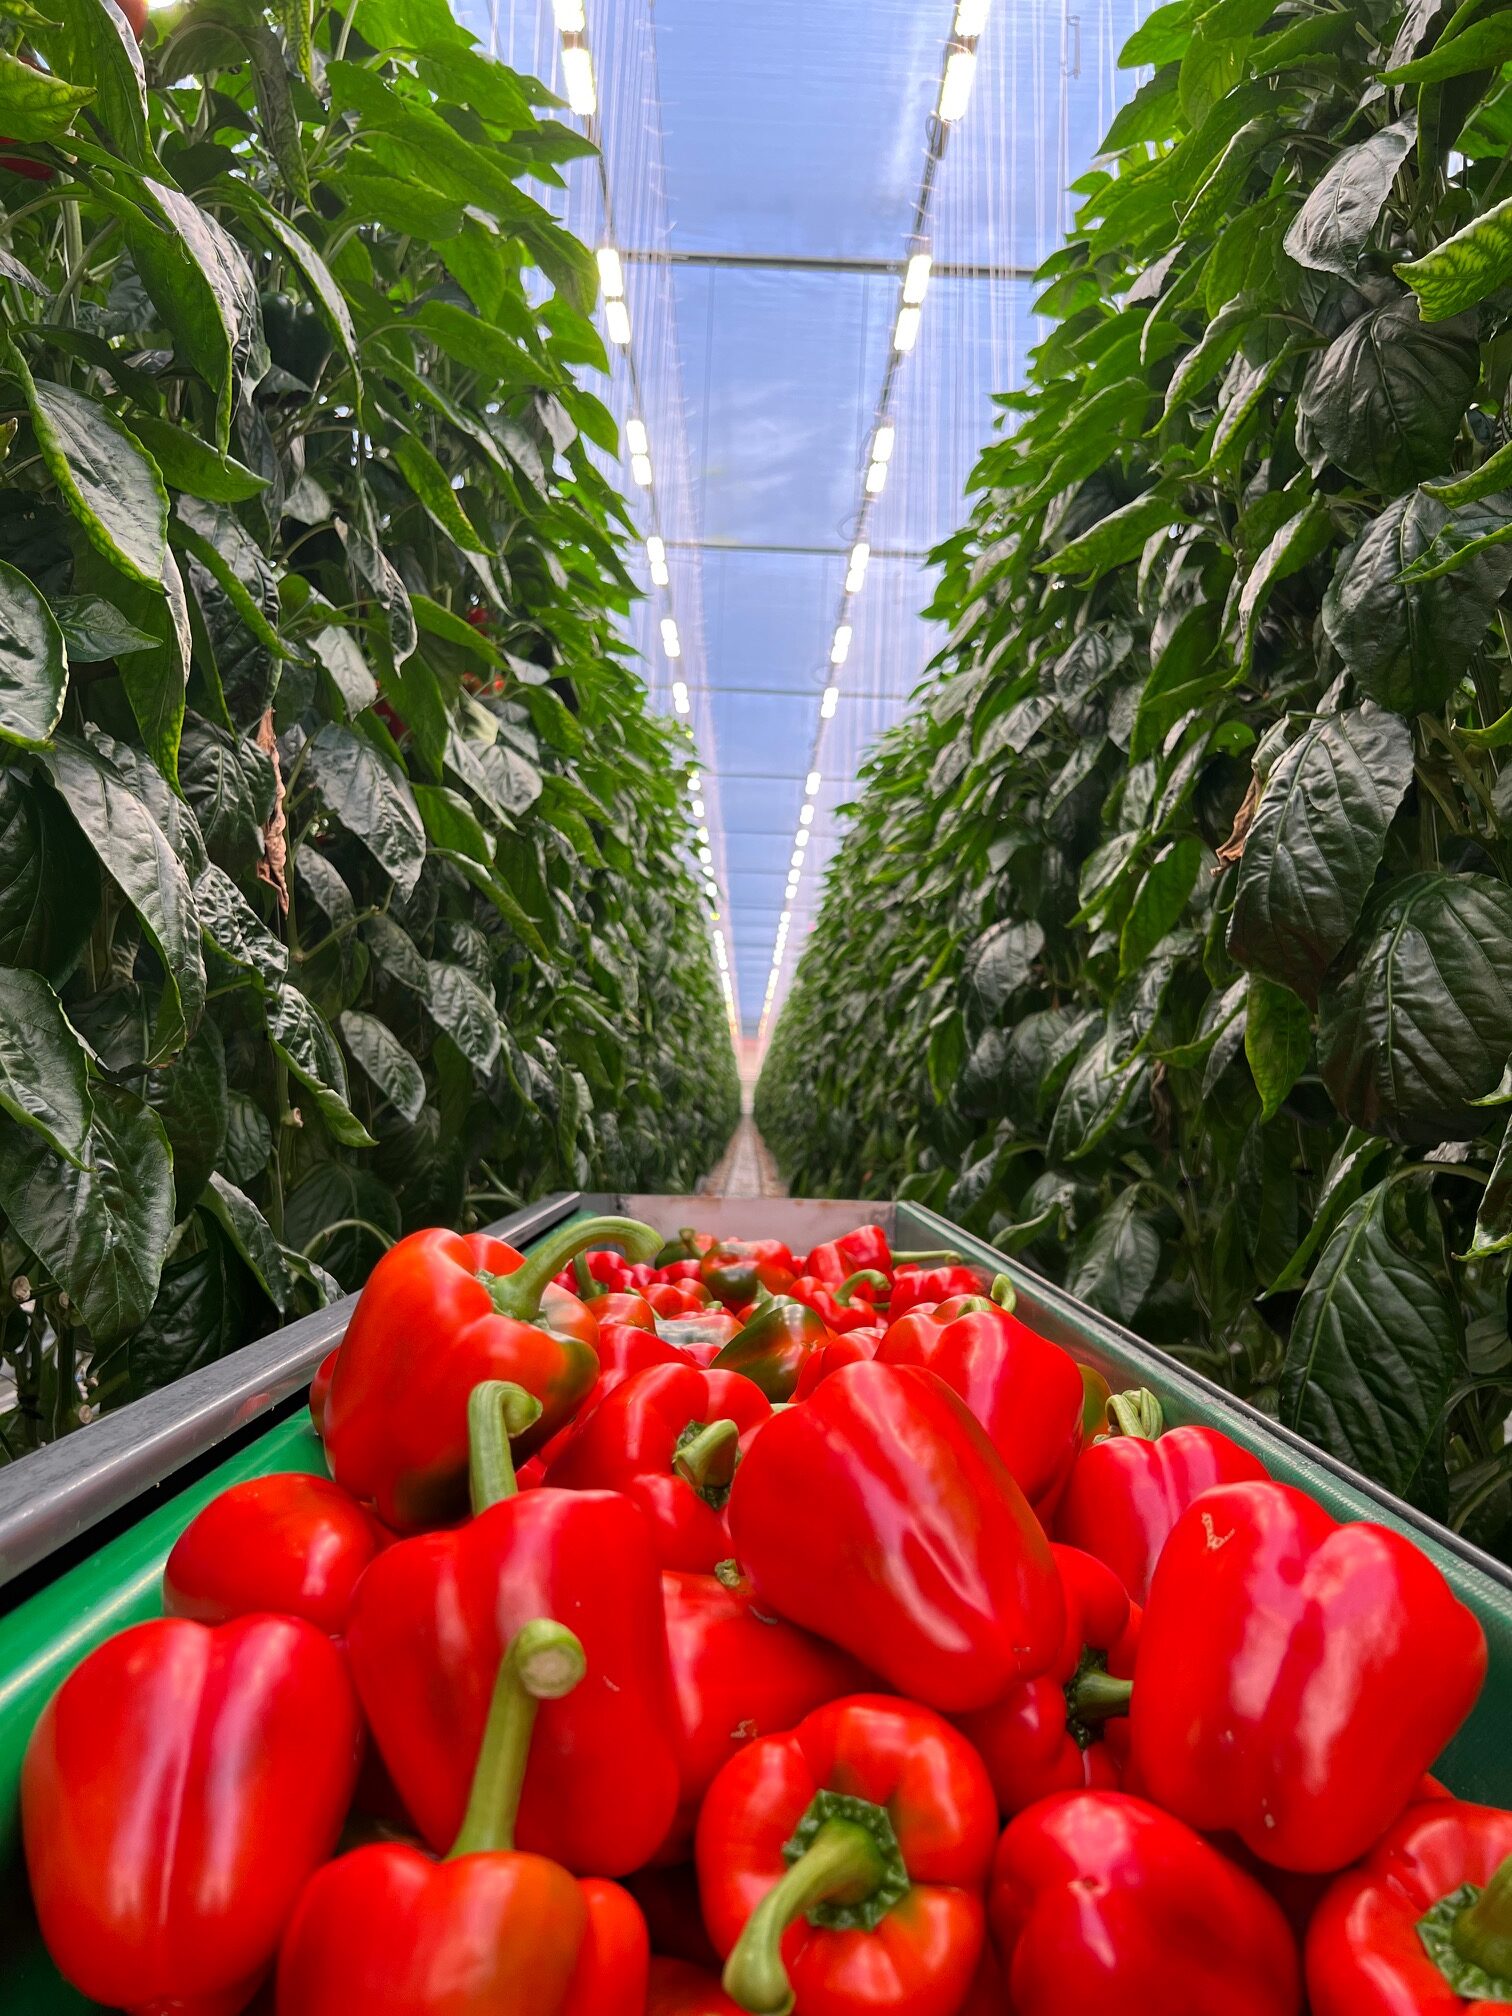 Global Featured What's in Season? Bell Peppers (Field and Greenhouse) -  Canadian Food Focus, bell peppers fresh 